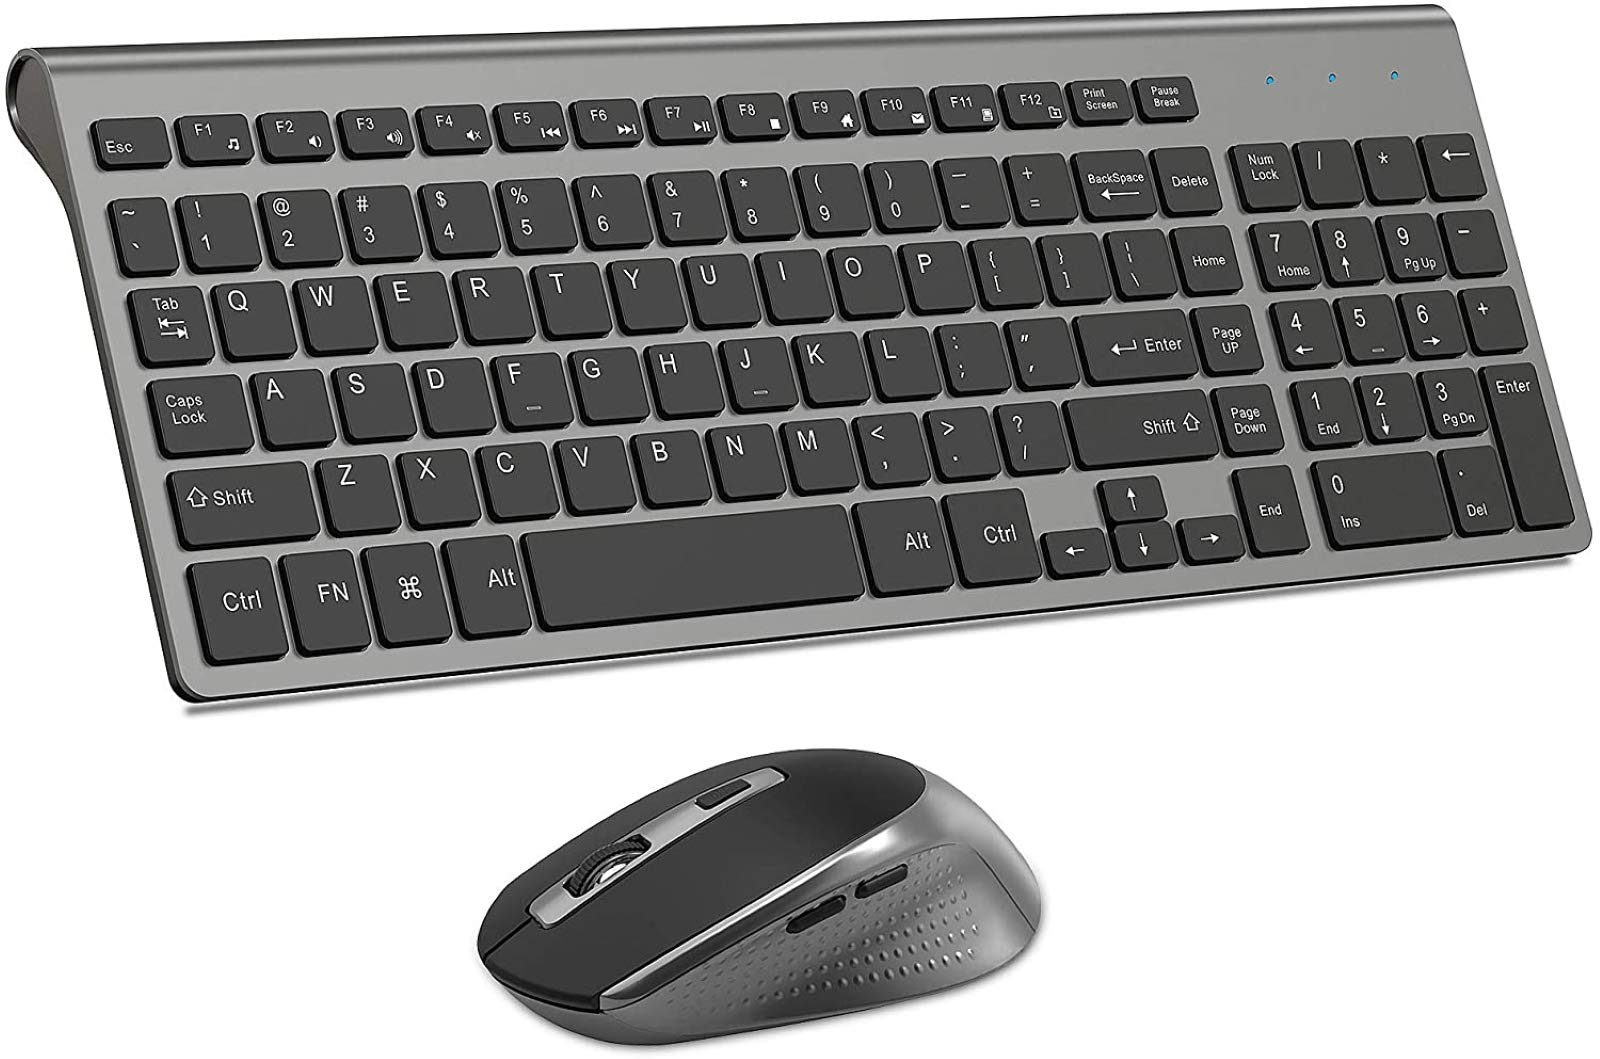 Wireless Keyboard Mouse Combo, J JOYACCESS Cordless Keyboard and Mouse Set, 2.4G Ergonomic Computer Keyboard Mouse for PC,Windows, Computer, Laptop, Desktop, Chromebook,Mac-GreyWireless Keyboard and Mouse Combo, Gamcatz Ultra Thin Full Size Keyboard with Number Pad and Rechargeable Slient Click Mouse for Mac iMac MacBook Air PC Laptop Tablet Computer Windows-Silver White
